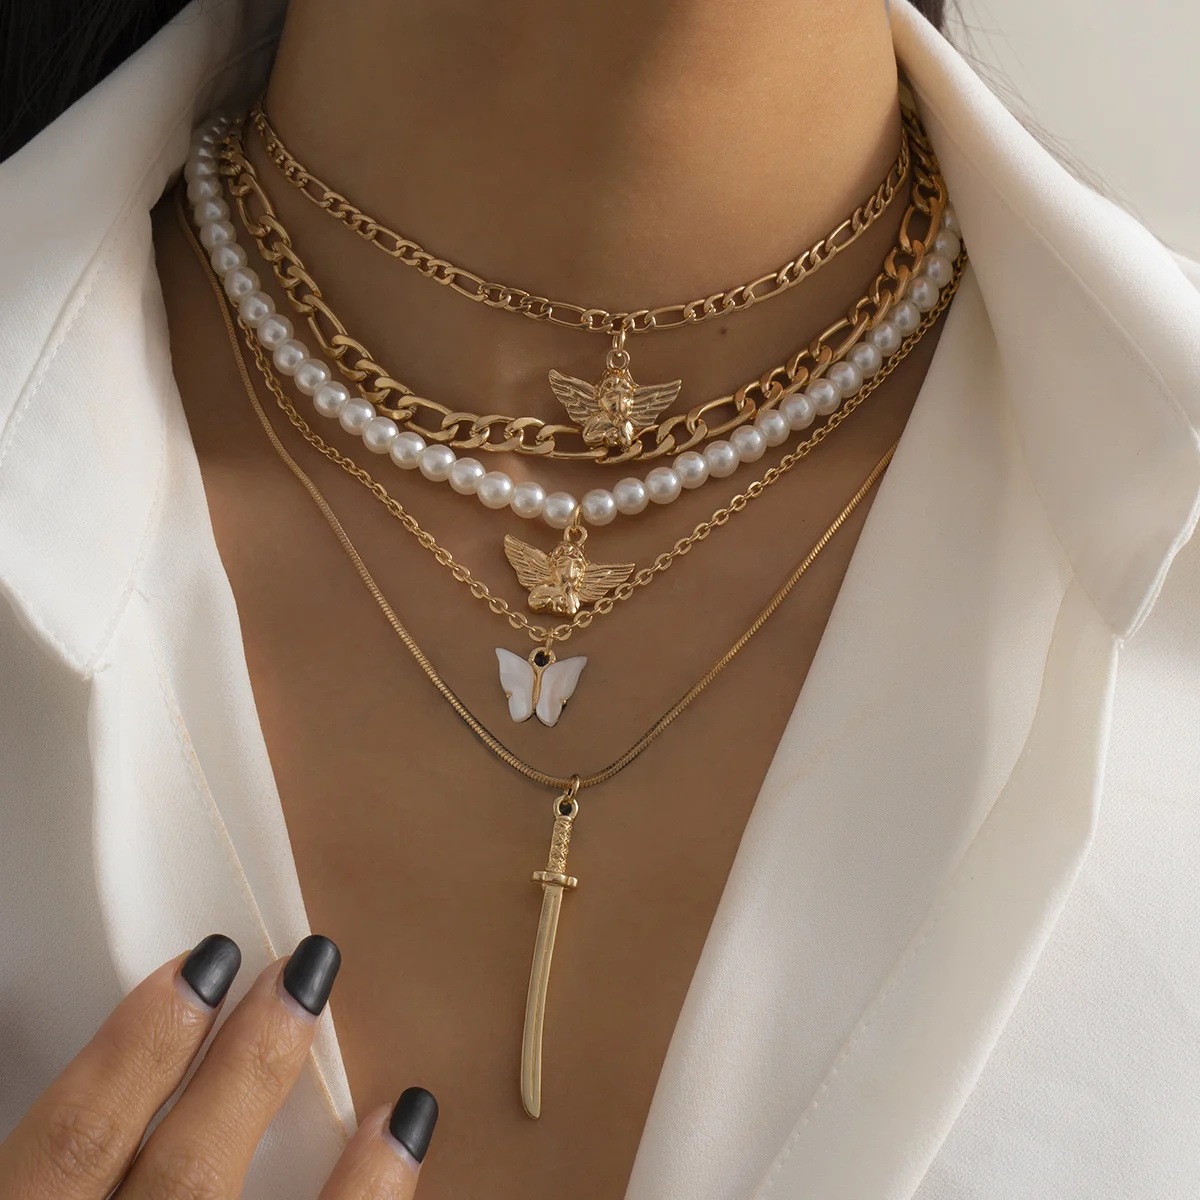 5pcs Combo Set Hip-hop Punk Style Multi-layer Women Fashion Fine Necklace Exaggerated Pearl Clavicle Chain Pendant Girl Jewelry